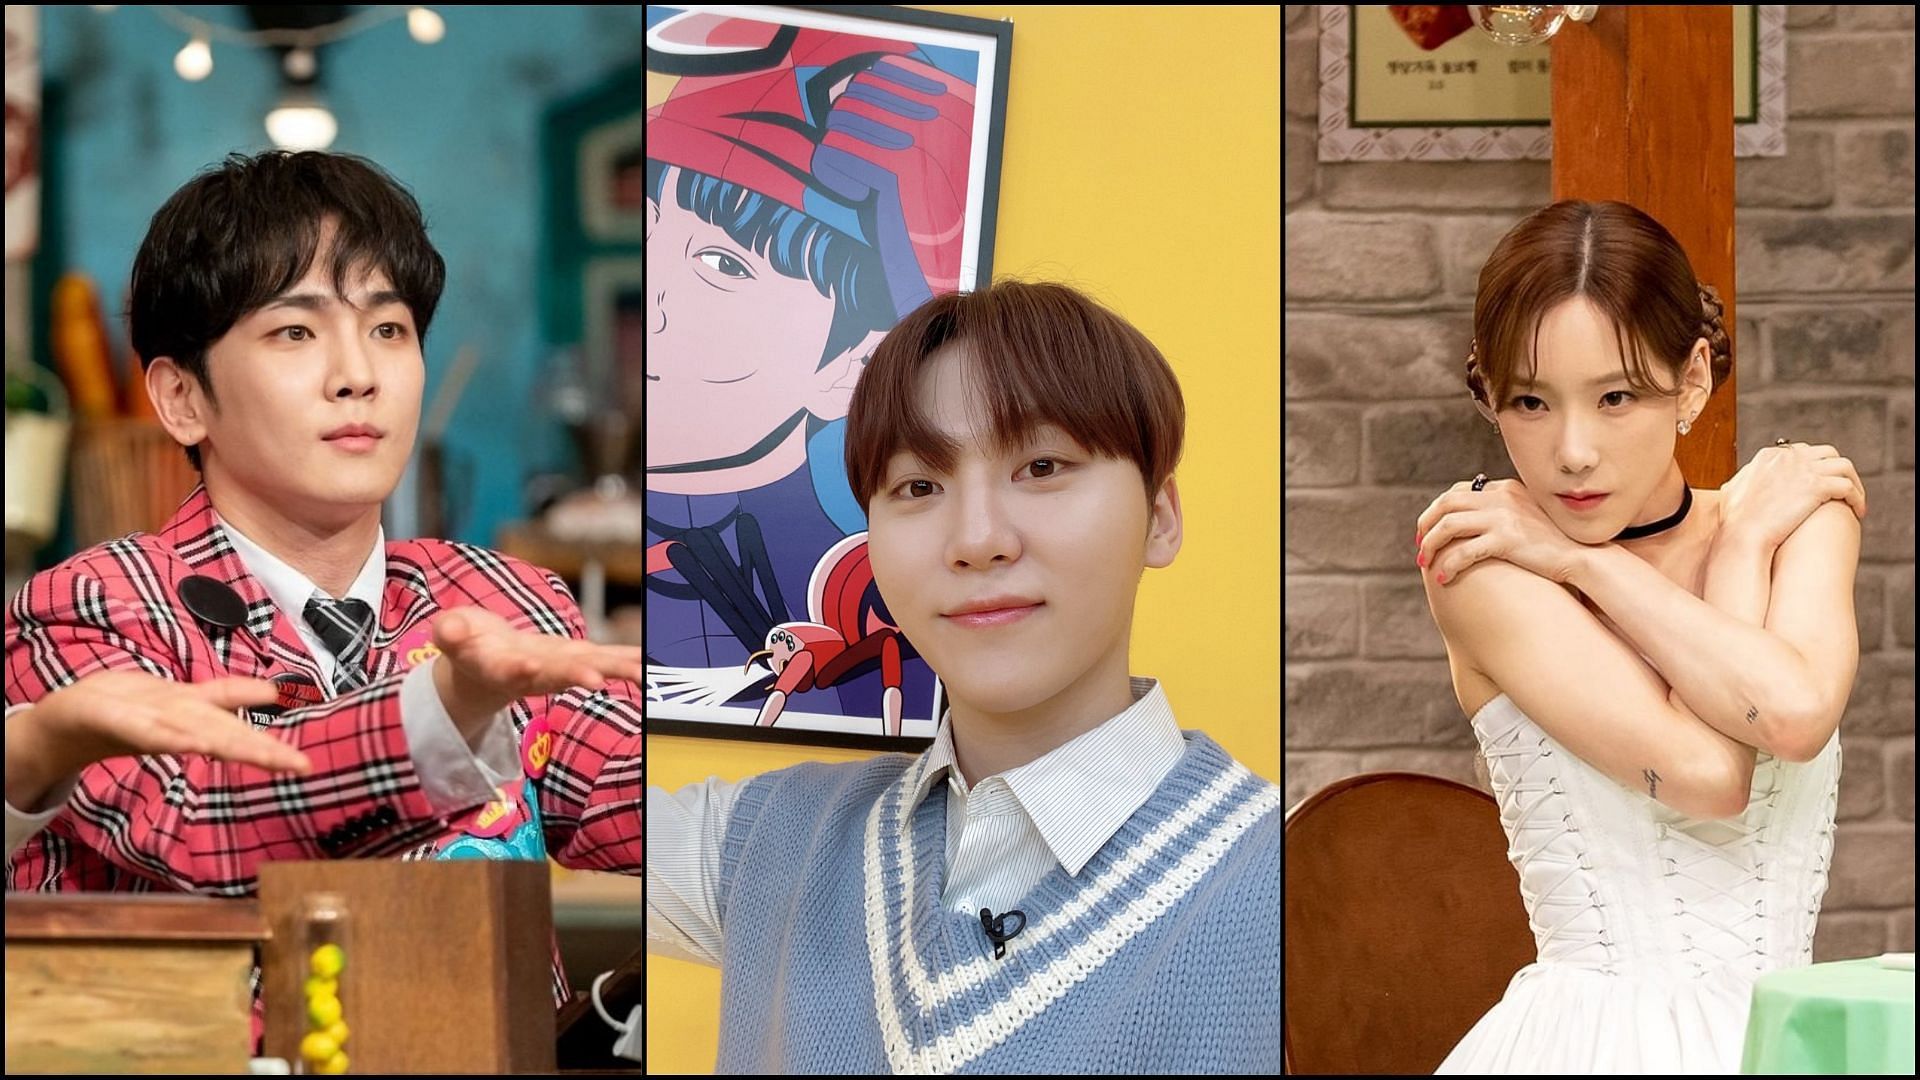 SHINee&#039;s KEY, SEVENTEEN&#039;s Seungkwan, and Girls&#039; Generation&#039;s Taeyeon are some K-pop idols acing their variety show game. (Image via Twitter/ urikeyro_, SeventeenDisse, KTYproject_TH)